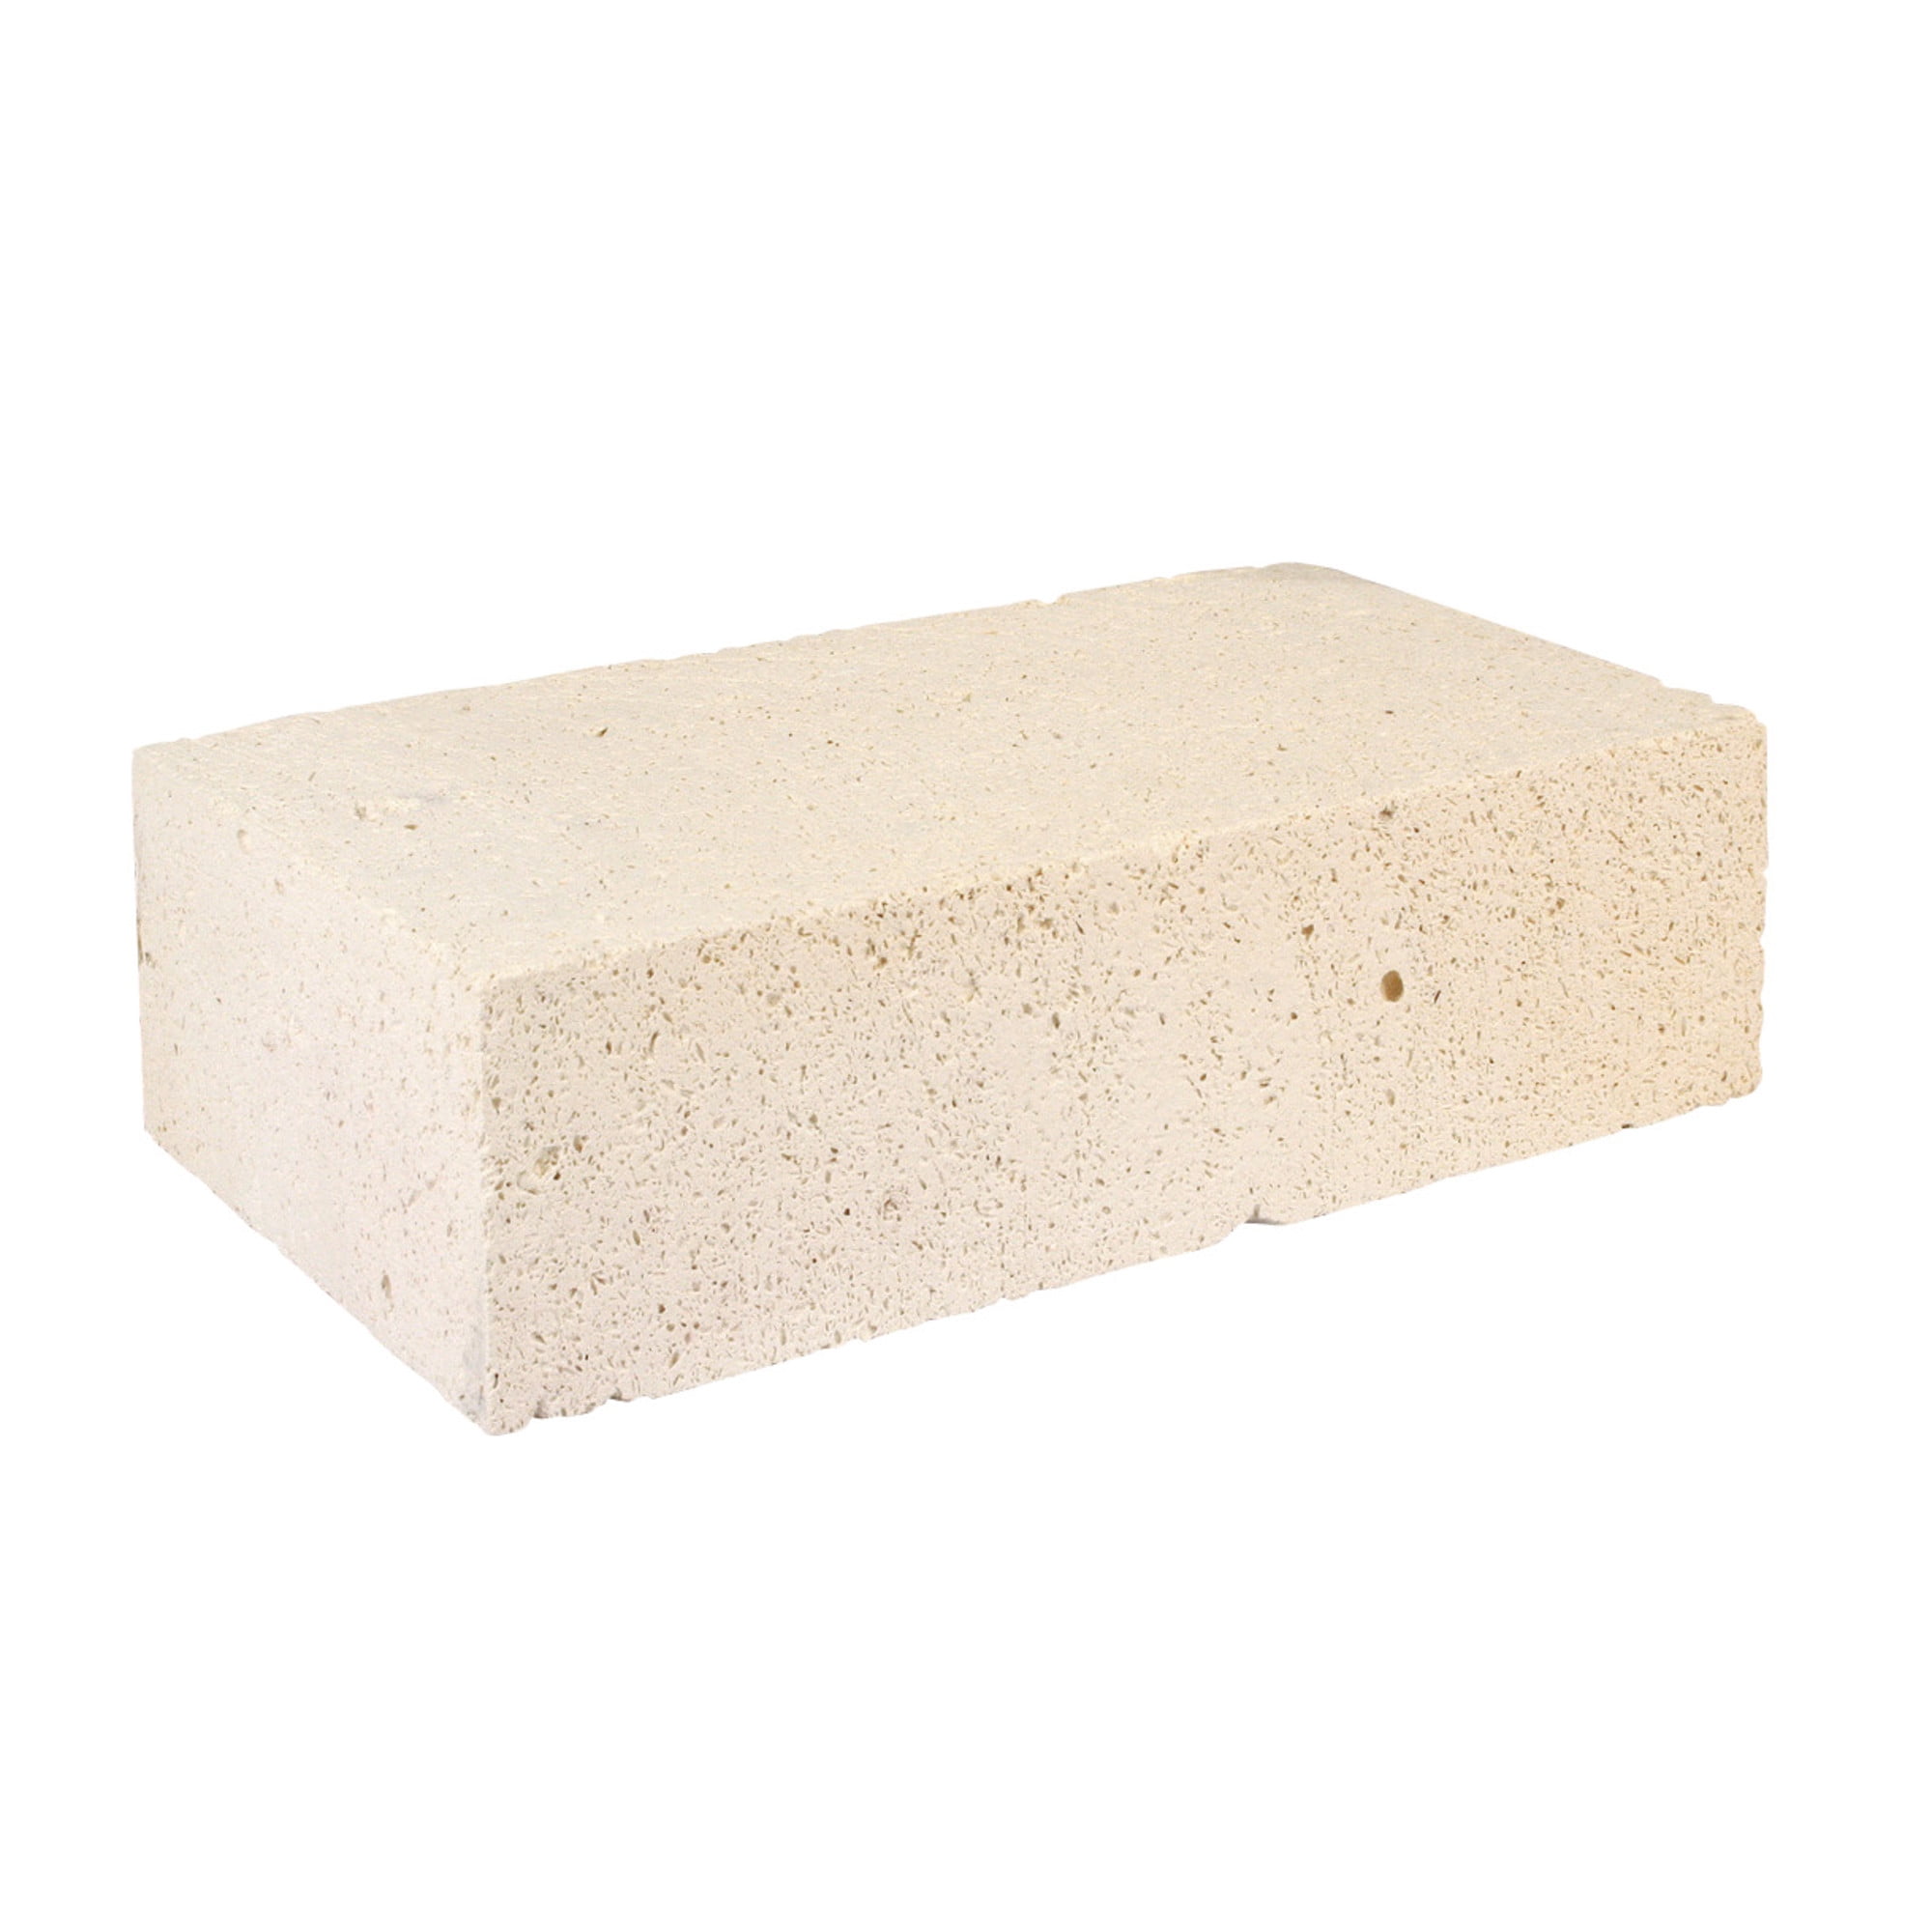 SIMOND STORE Insulating Fire Bricks, 2500F Rated, 1.75 x 4.5 x 9, Pack  of 8, Soft Fire Bricks for Forge, Kiln, Pizza Oven, Wood Stove, Fireplace